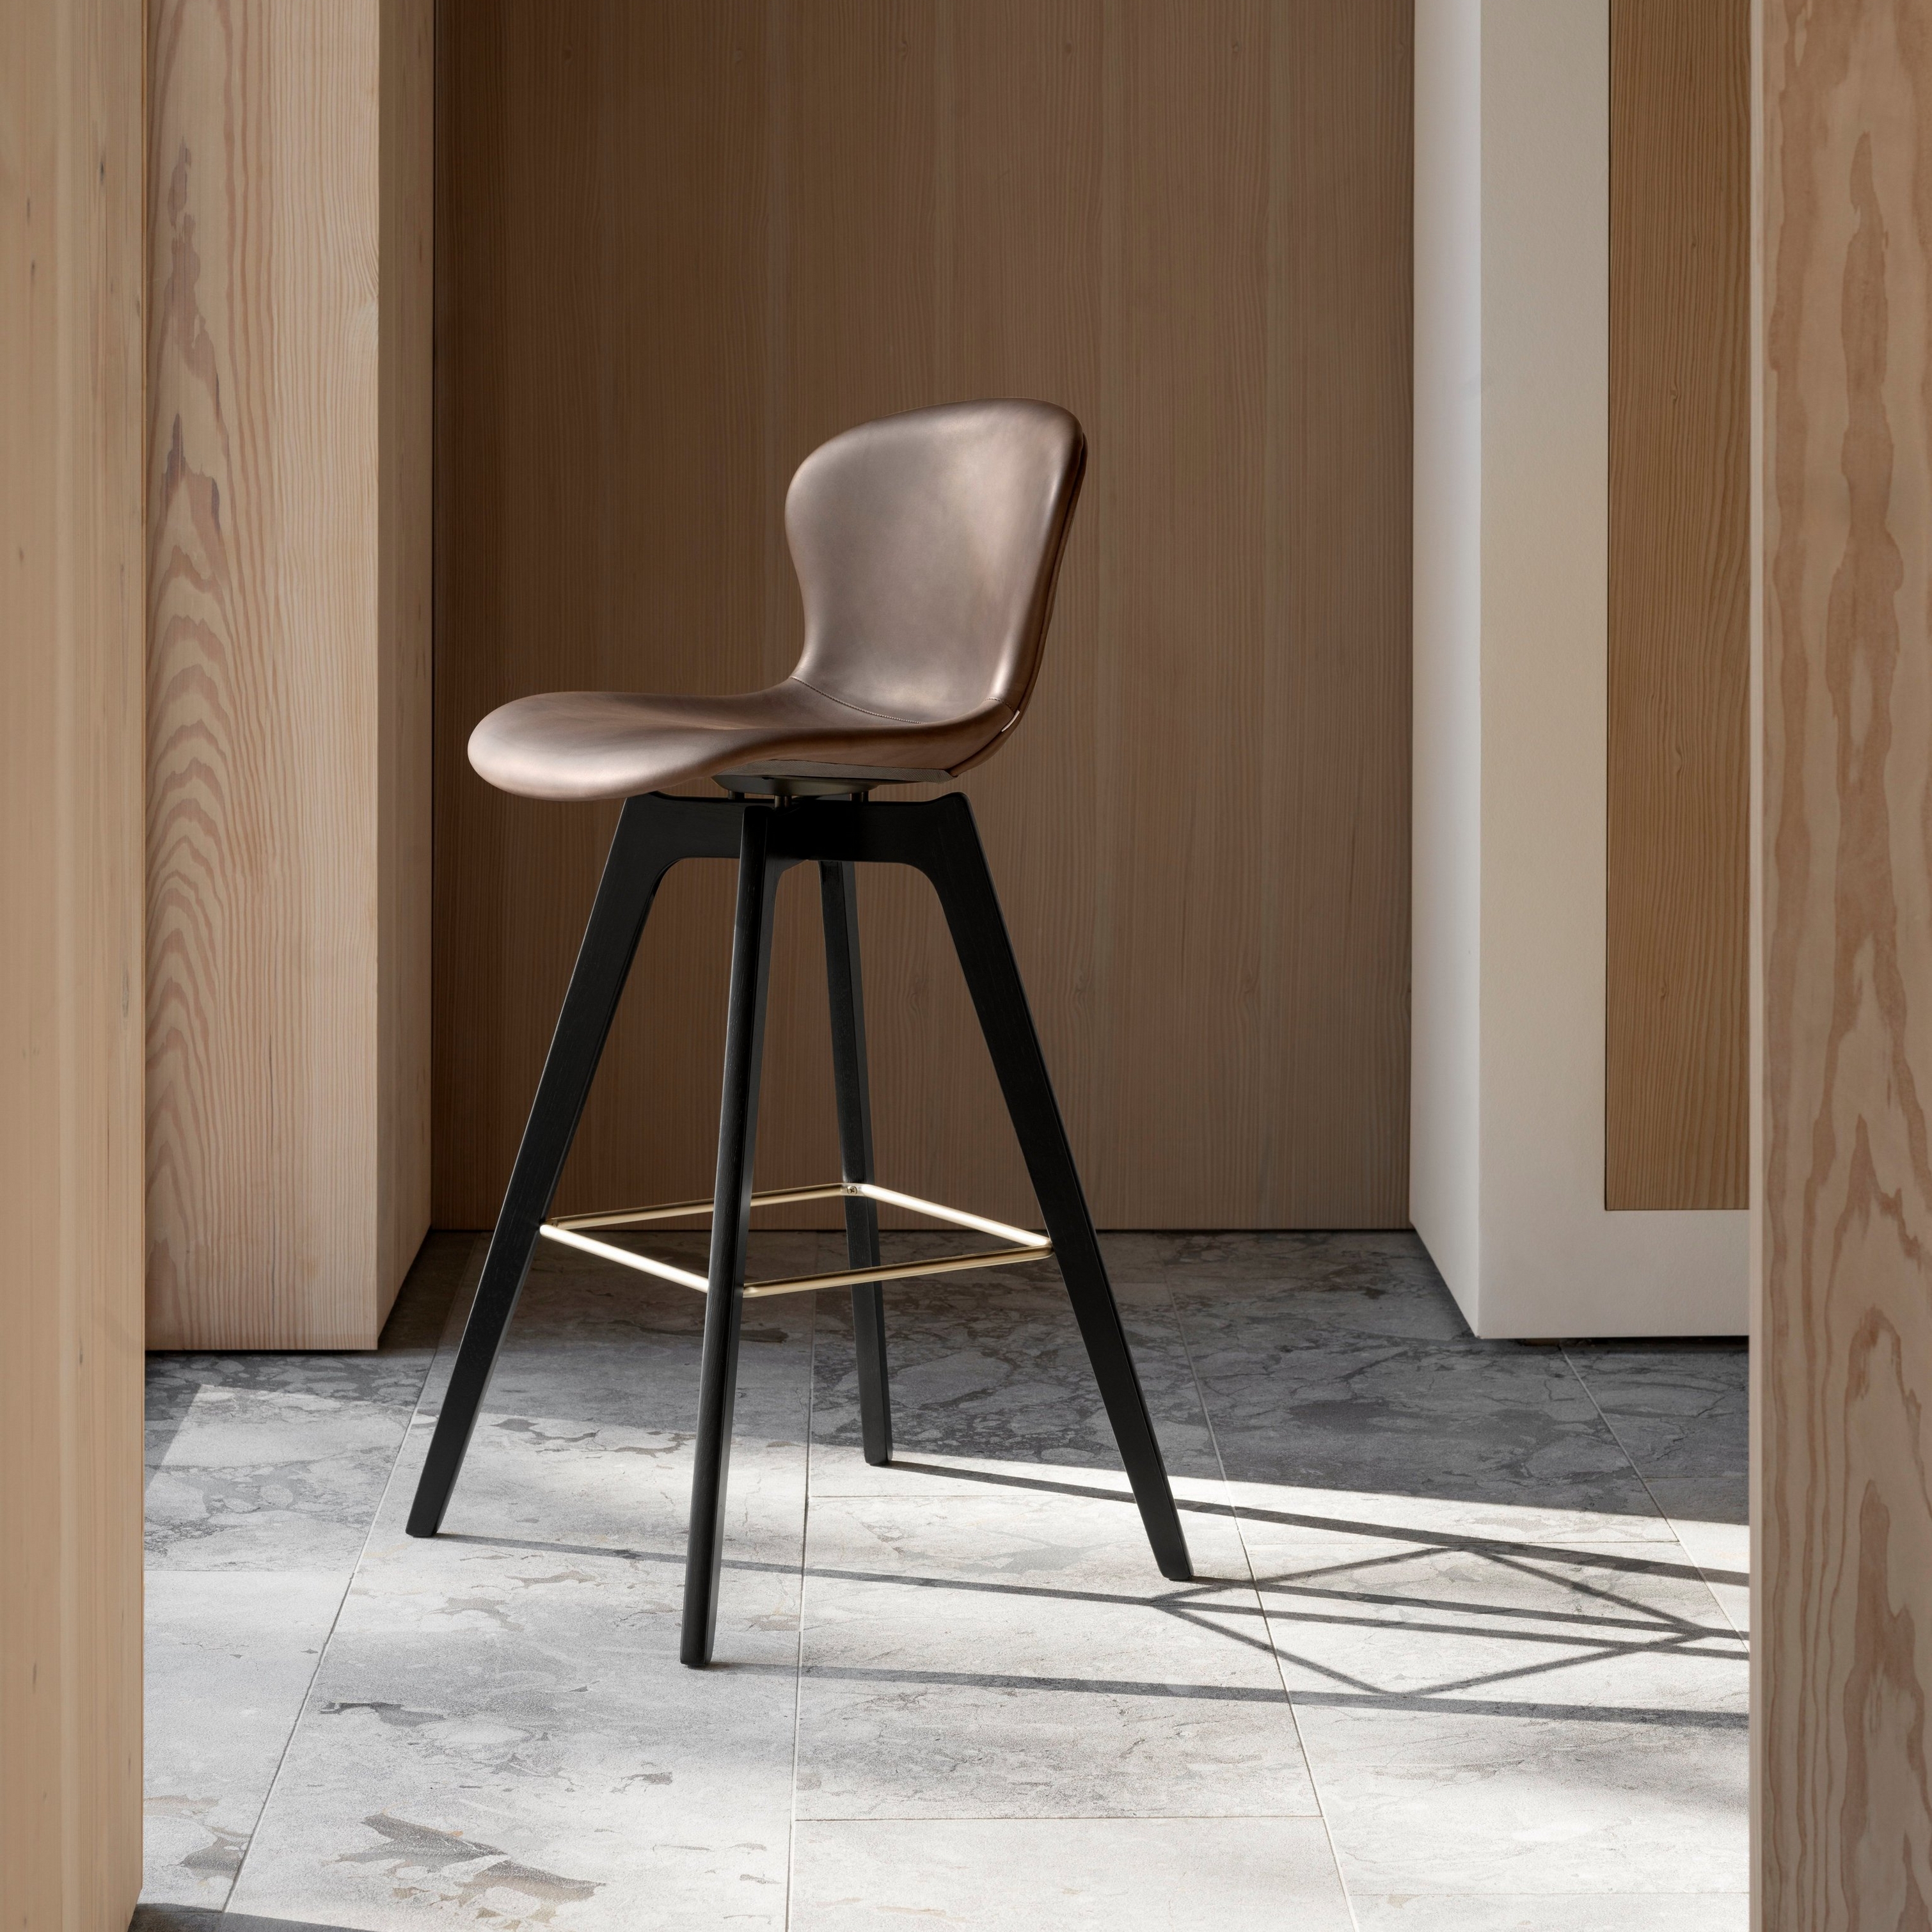 Adelaide bar stool in an open room